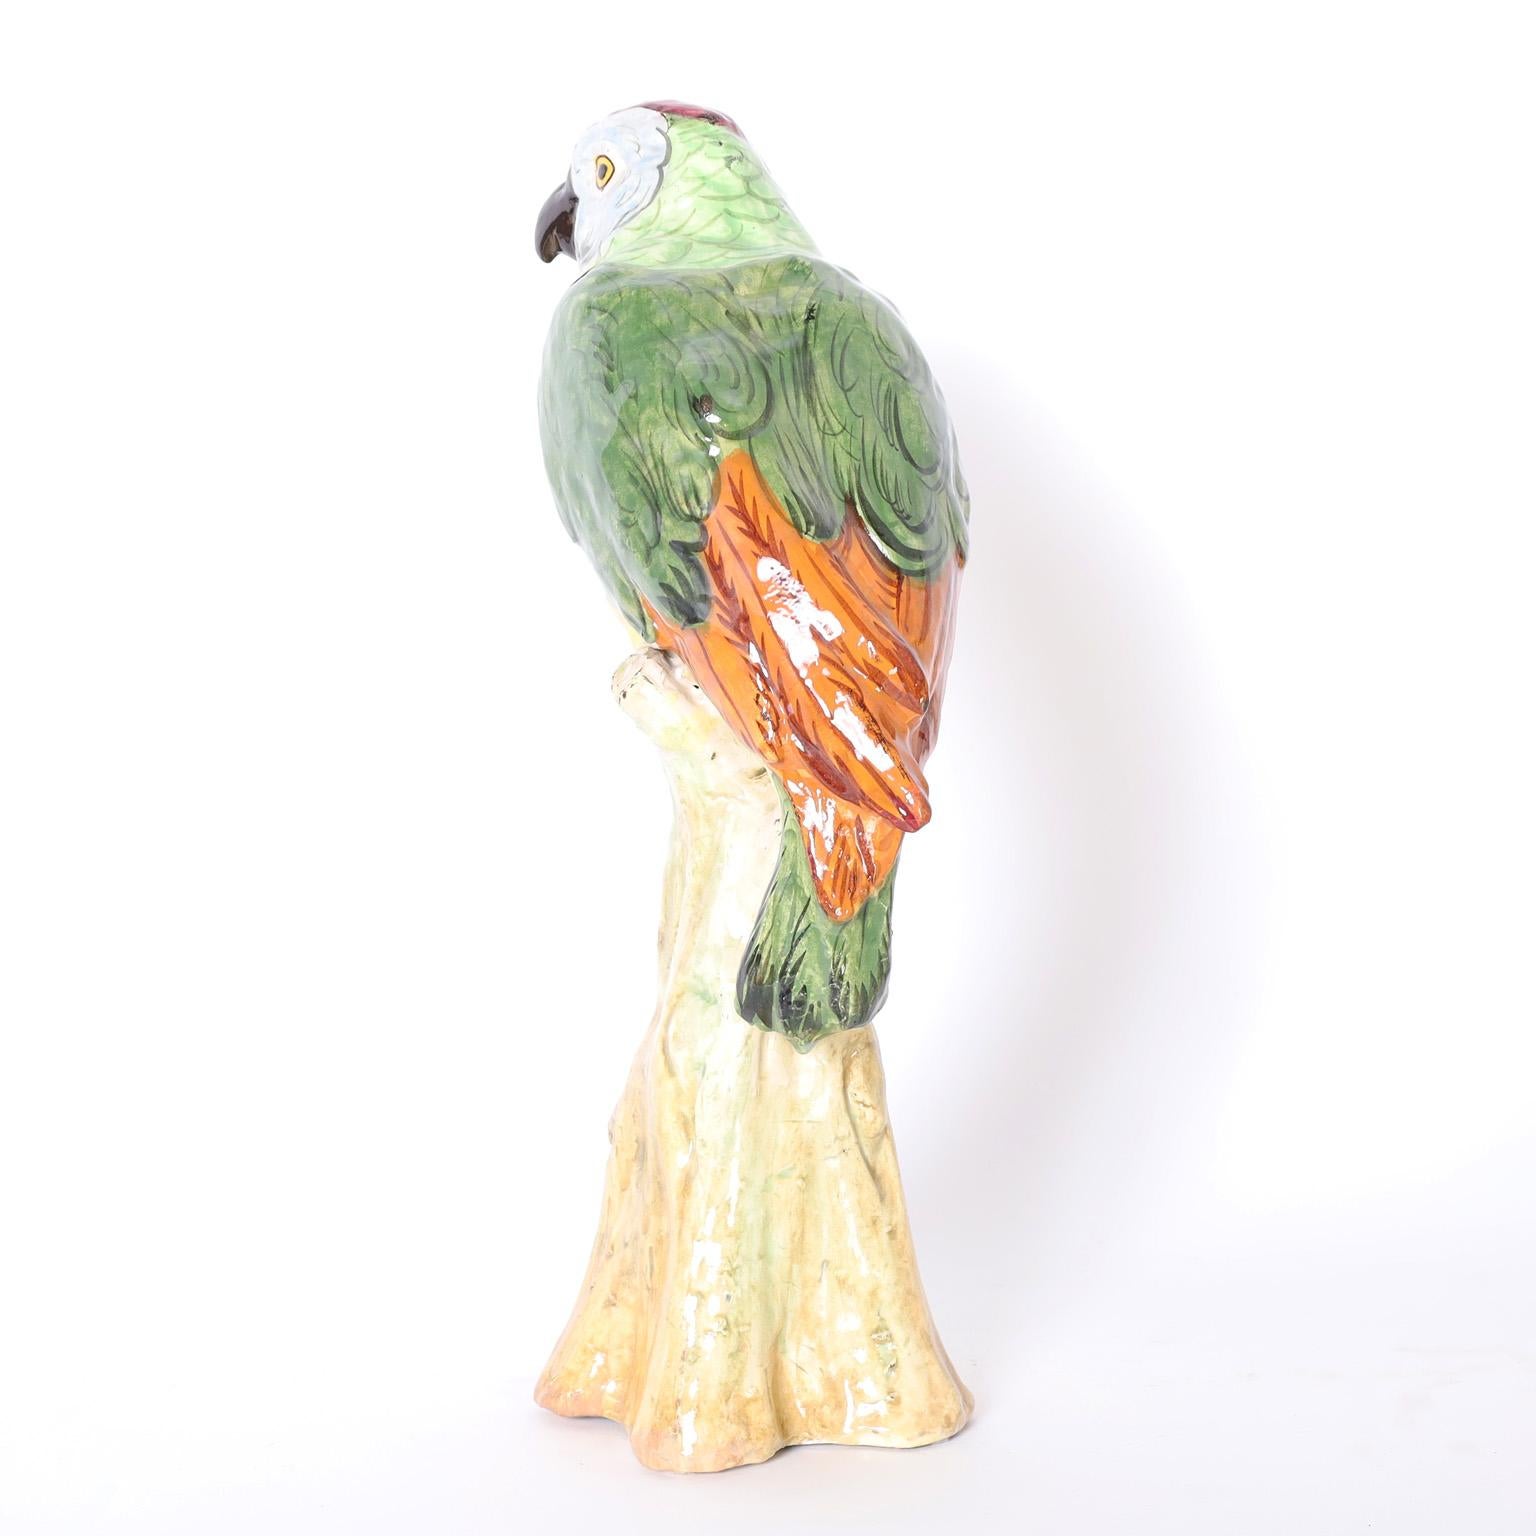 Pair of parrots crafted in terra cotta, decorated in tropical colors and glazed while perched on faux tree trunks.